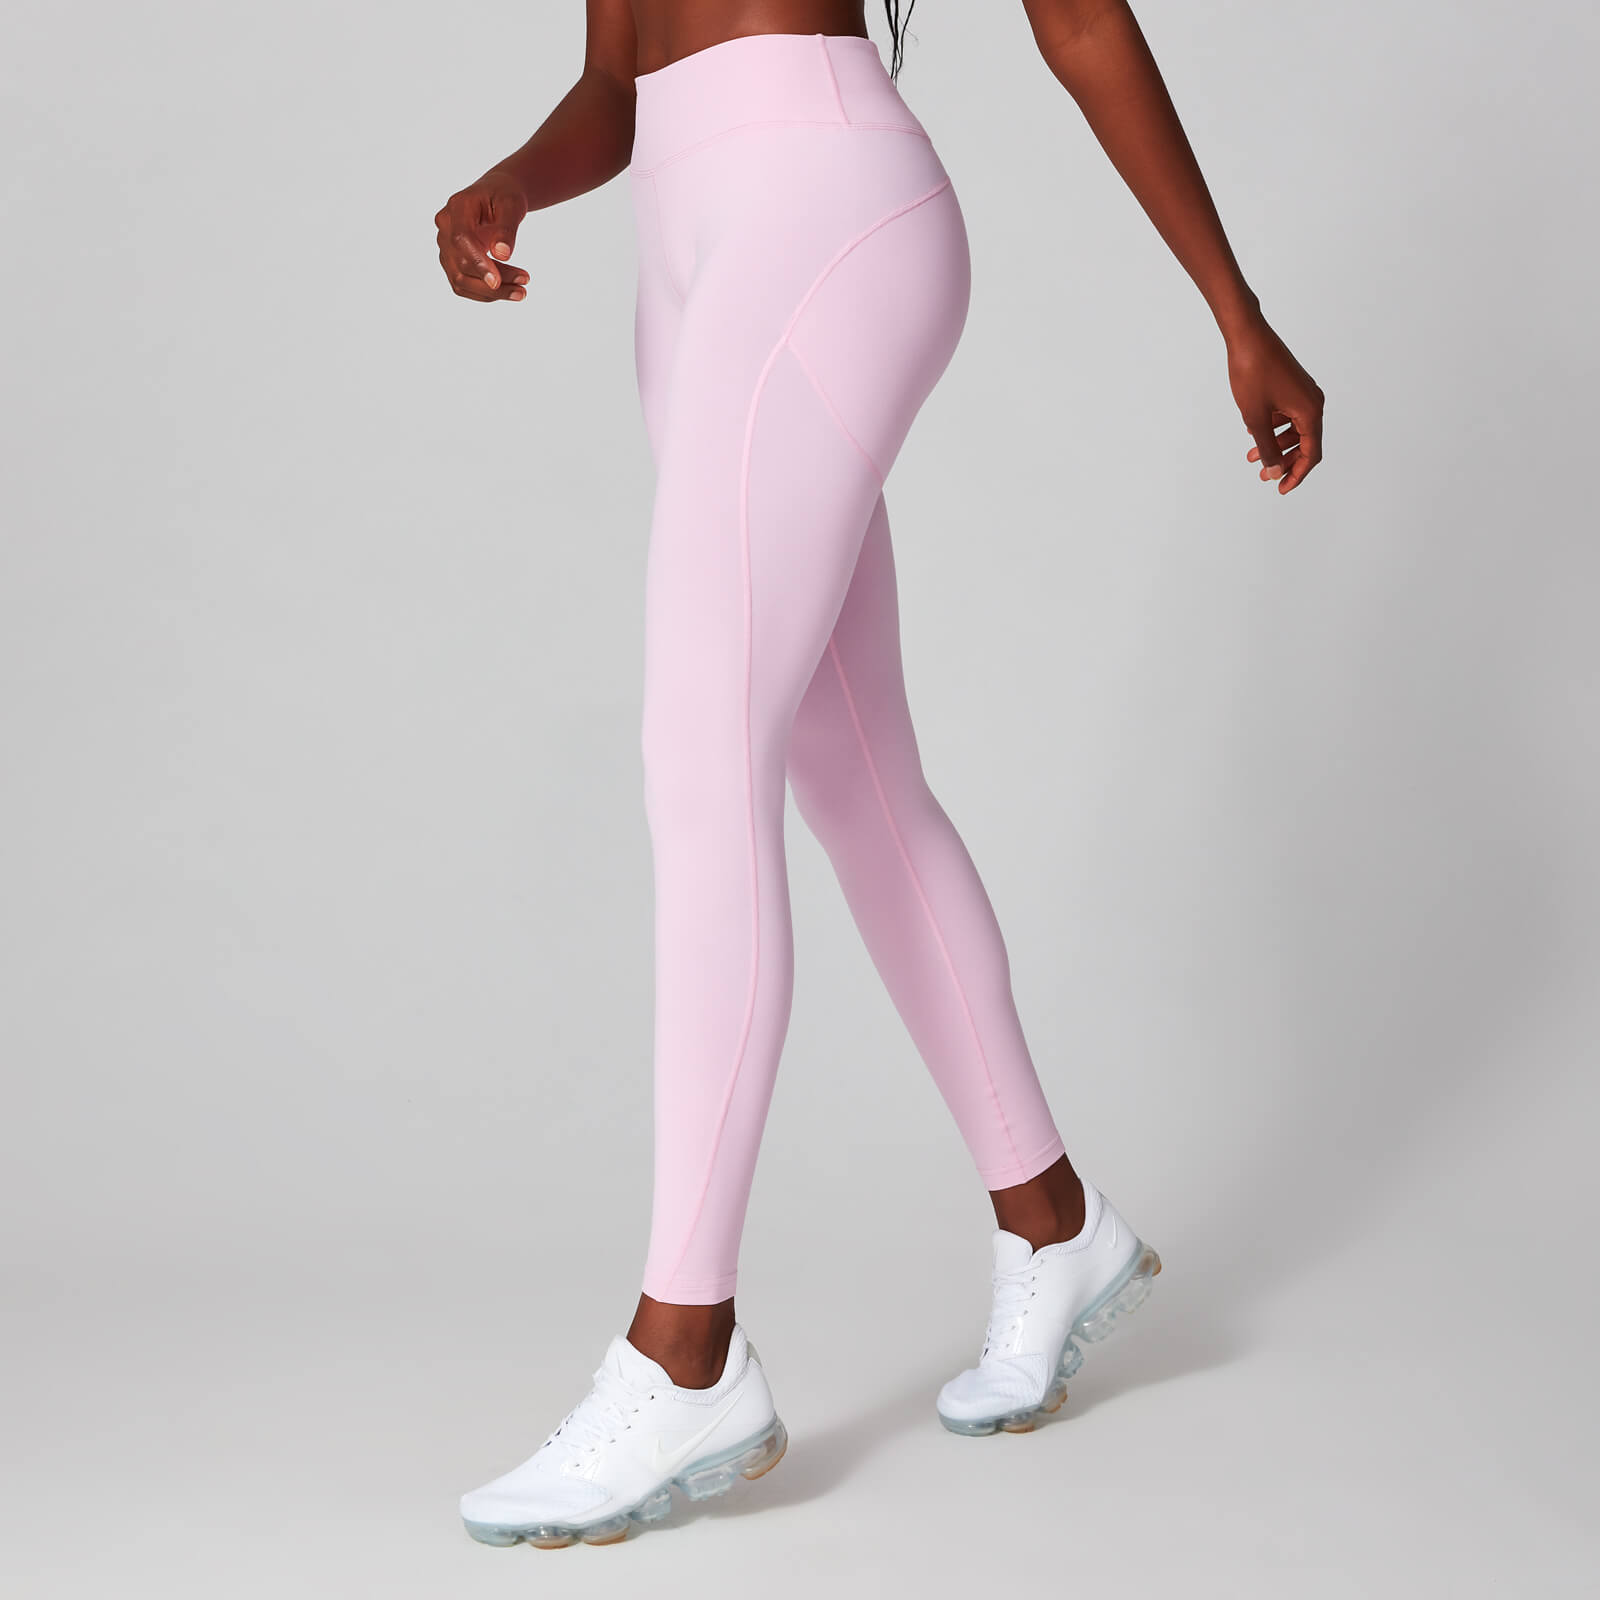 MP Power Leggings - Orchid Ice - XL